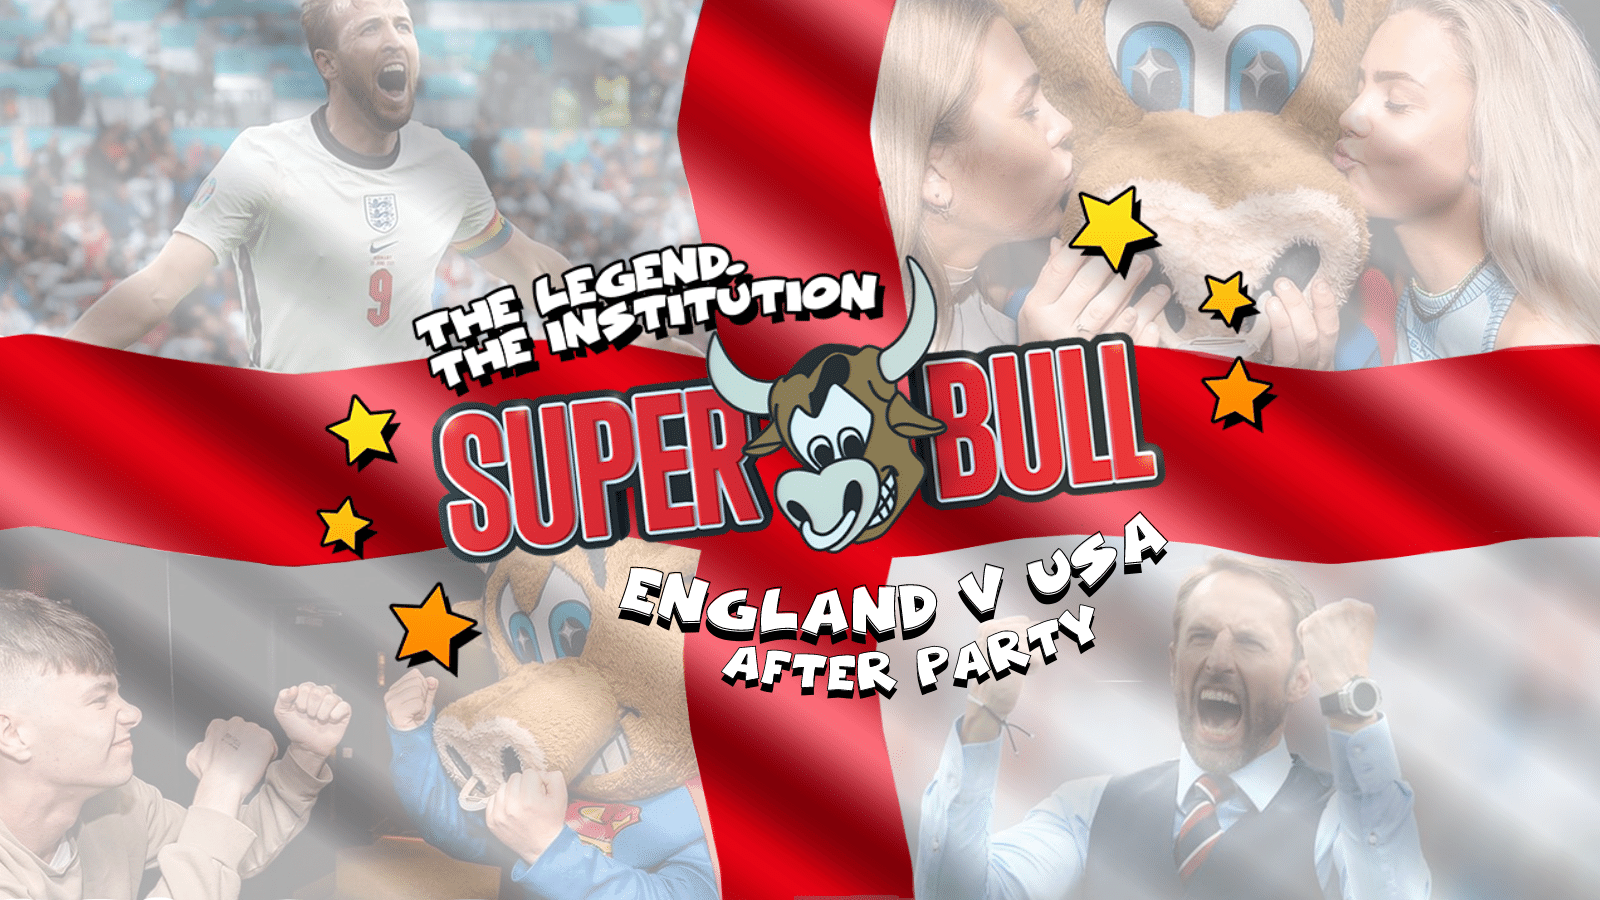 THE SUPERBULL WORLD CUP AFTER PARTY